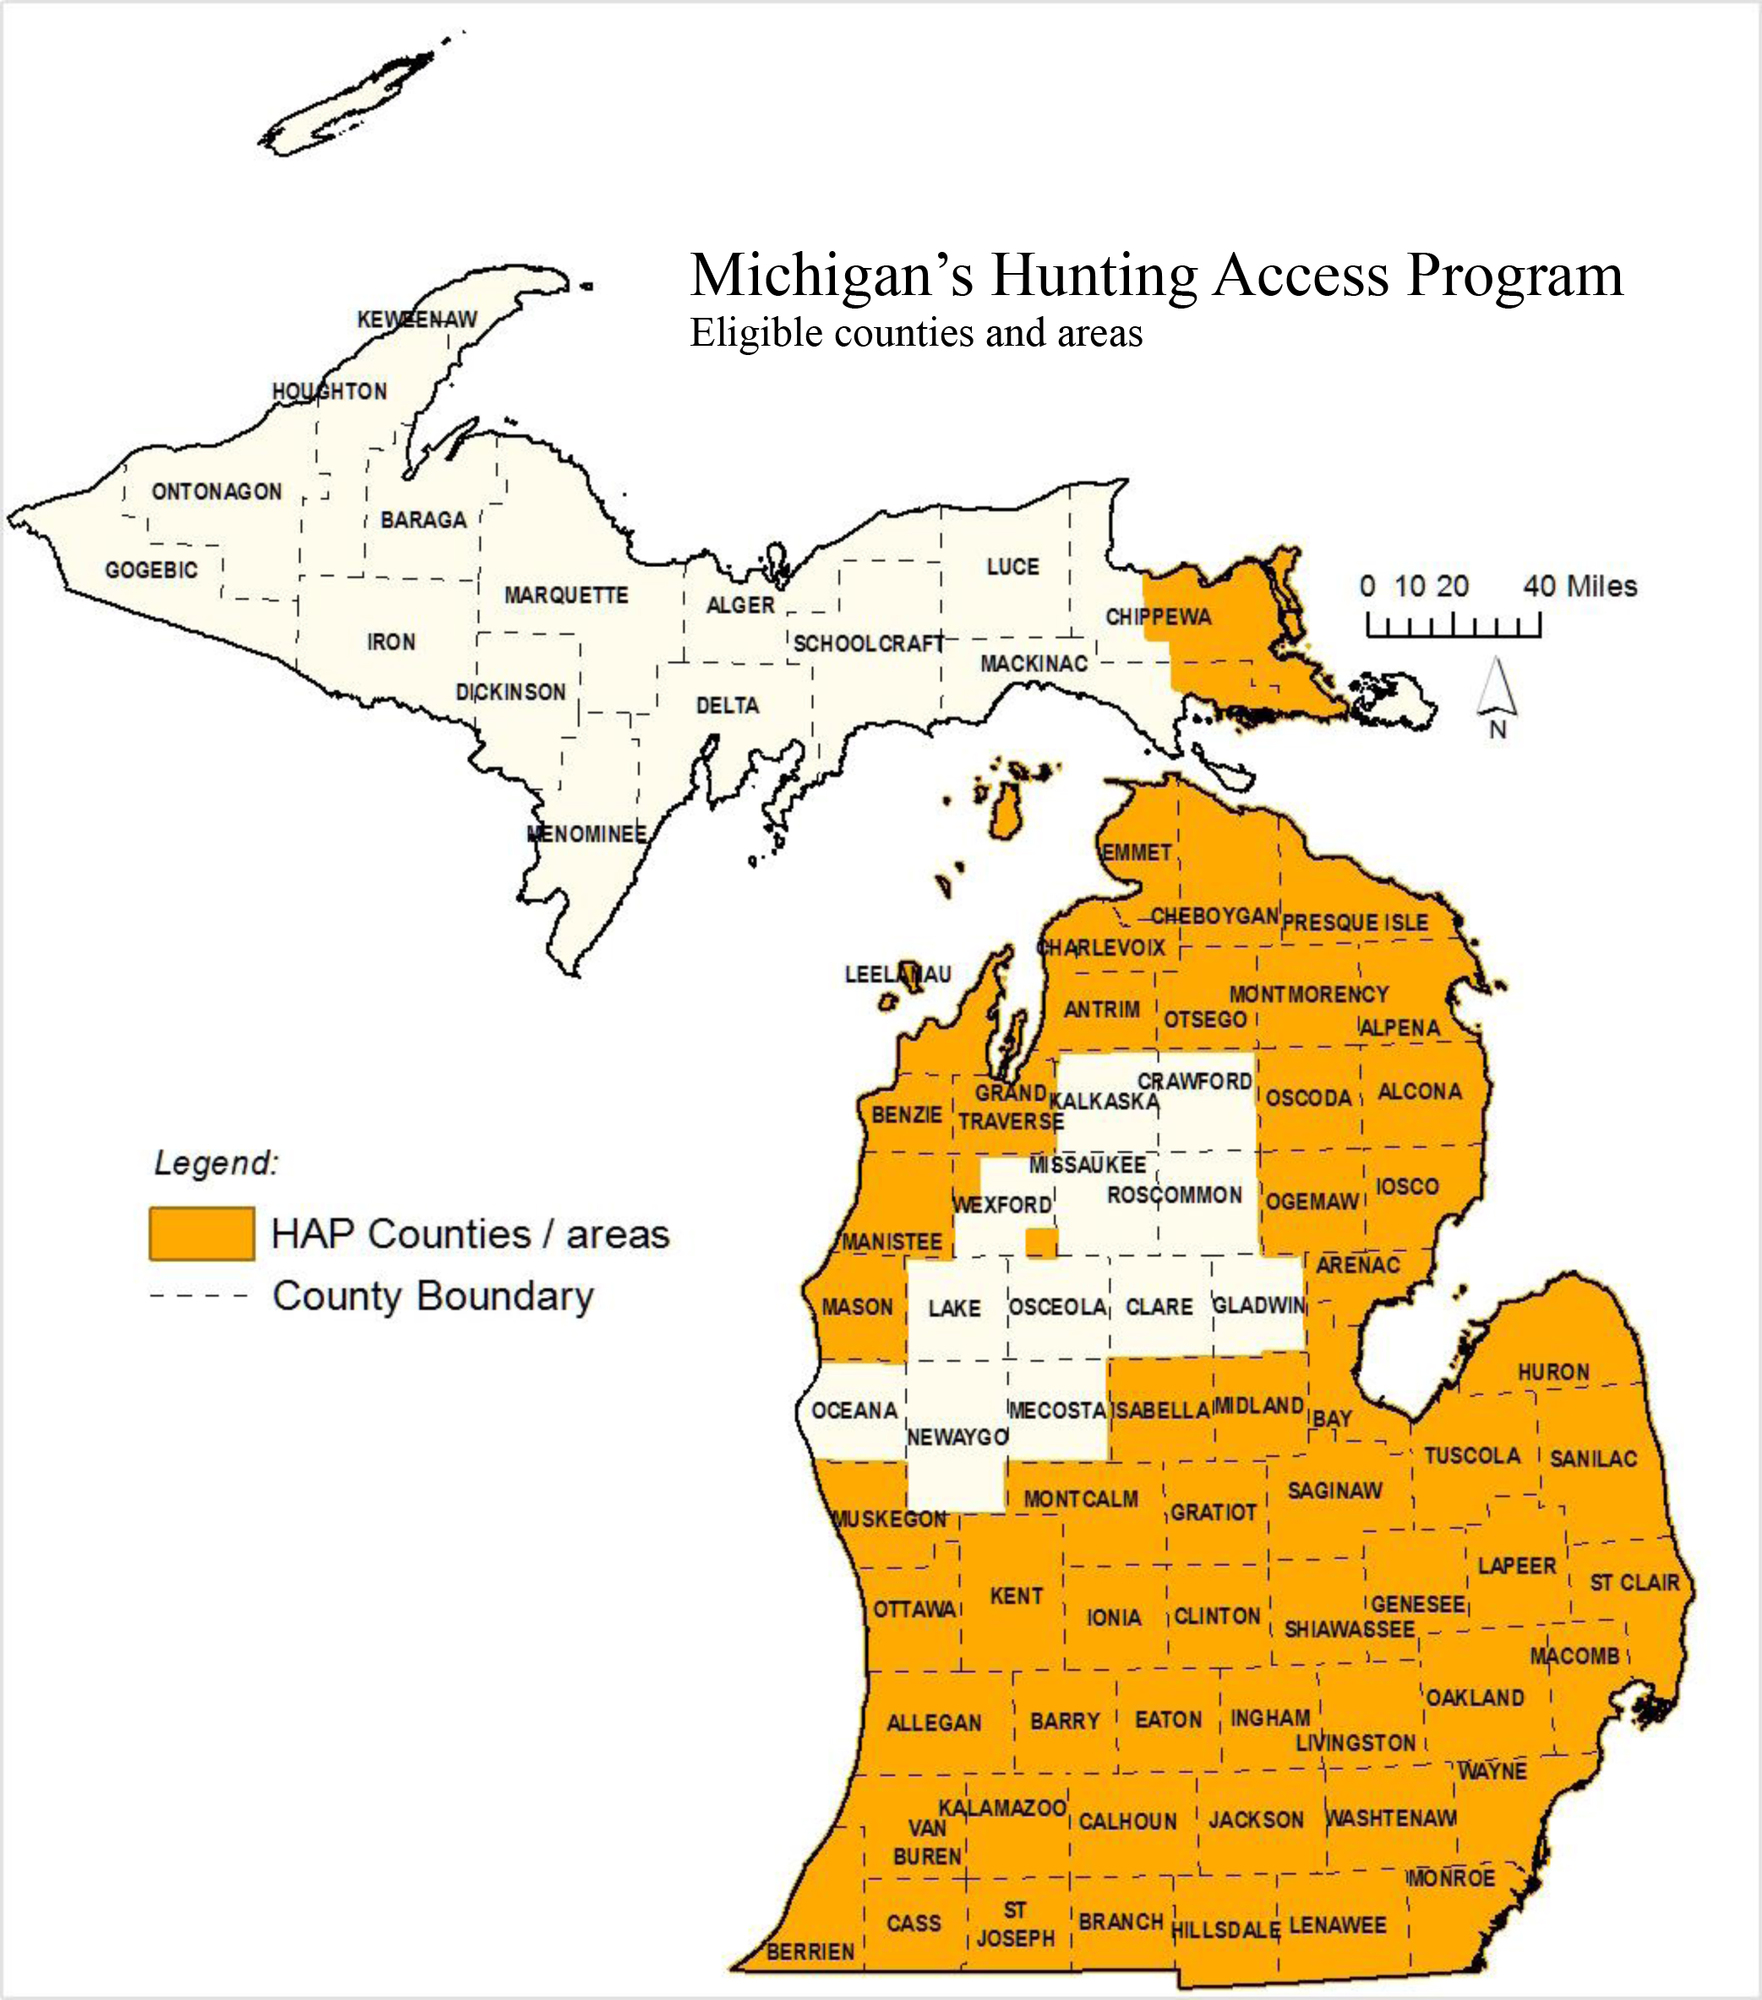 A map shows the eligible counties and areas in Michigan under the Hunting Access Program.